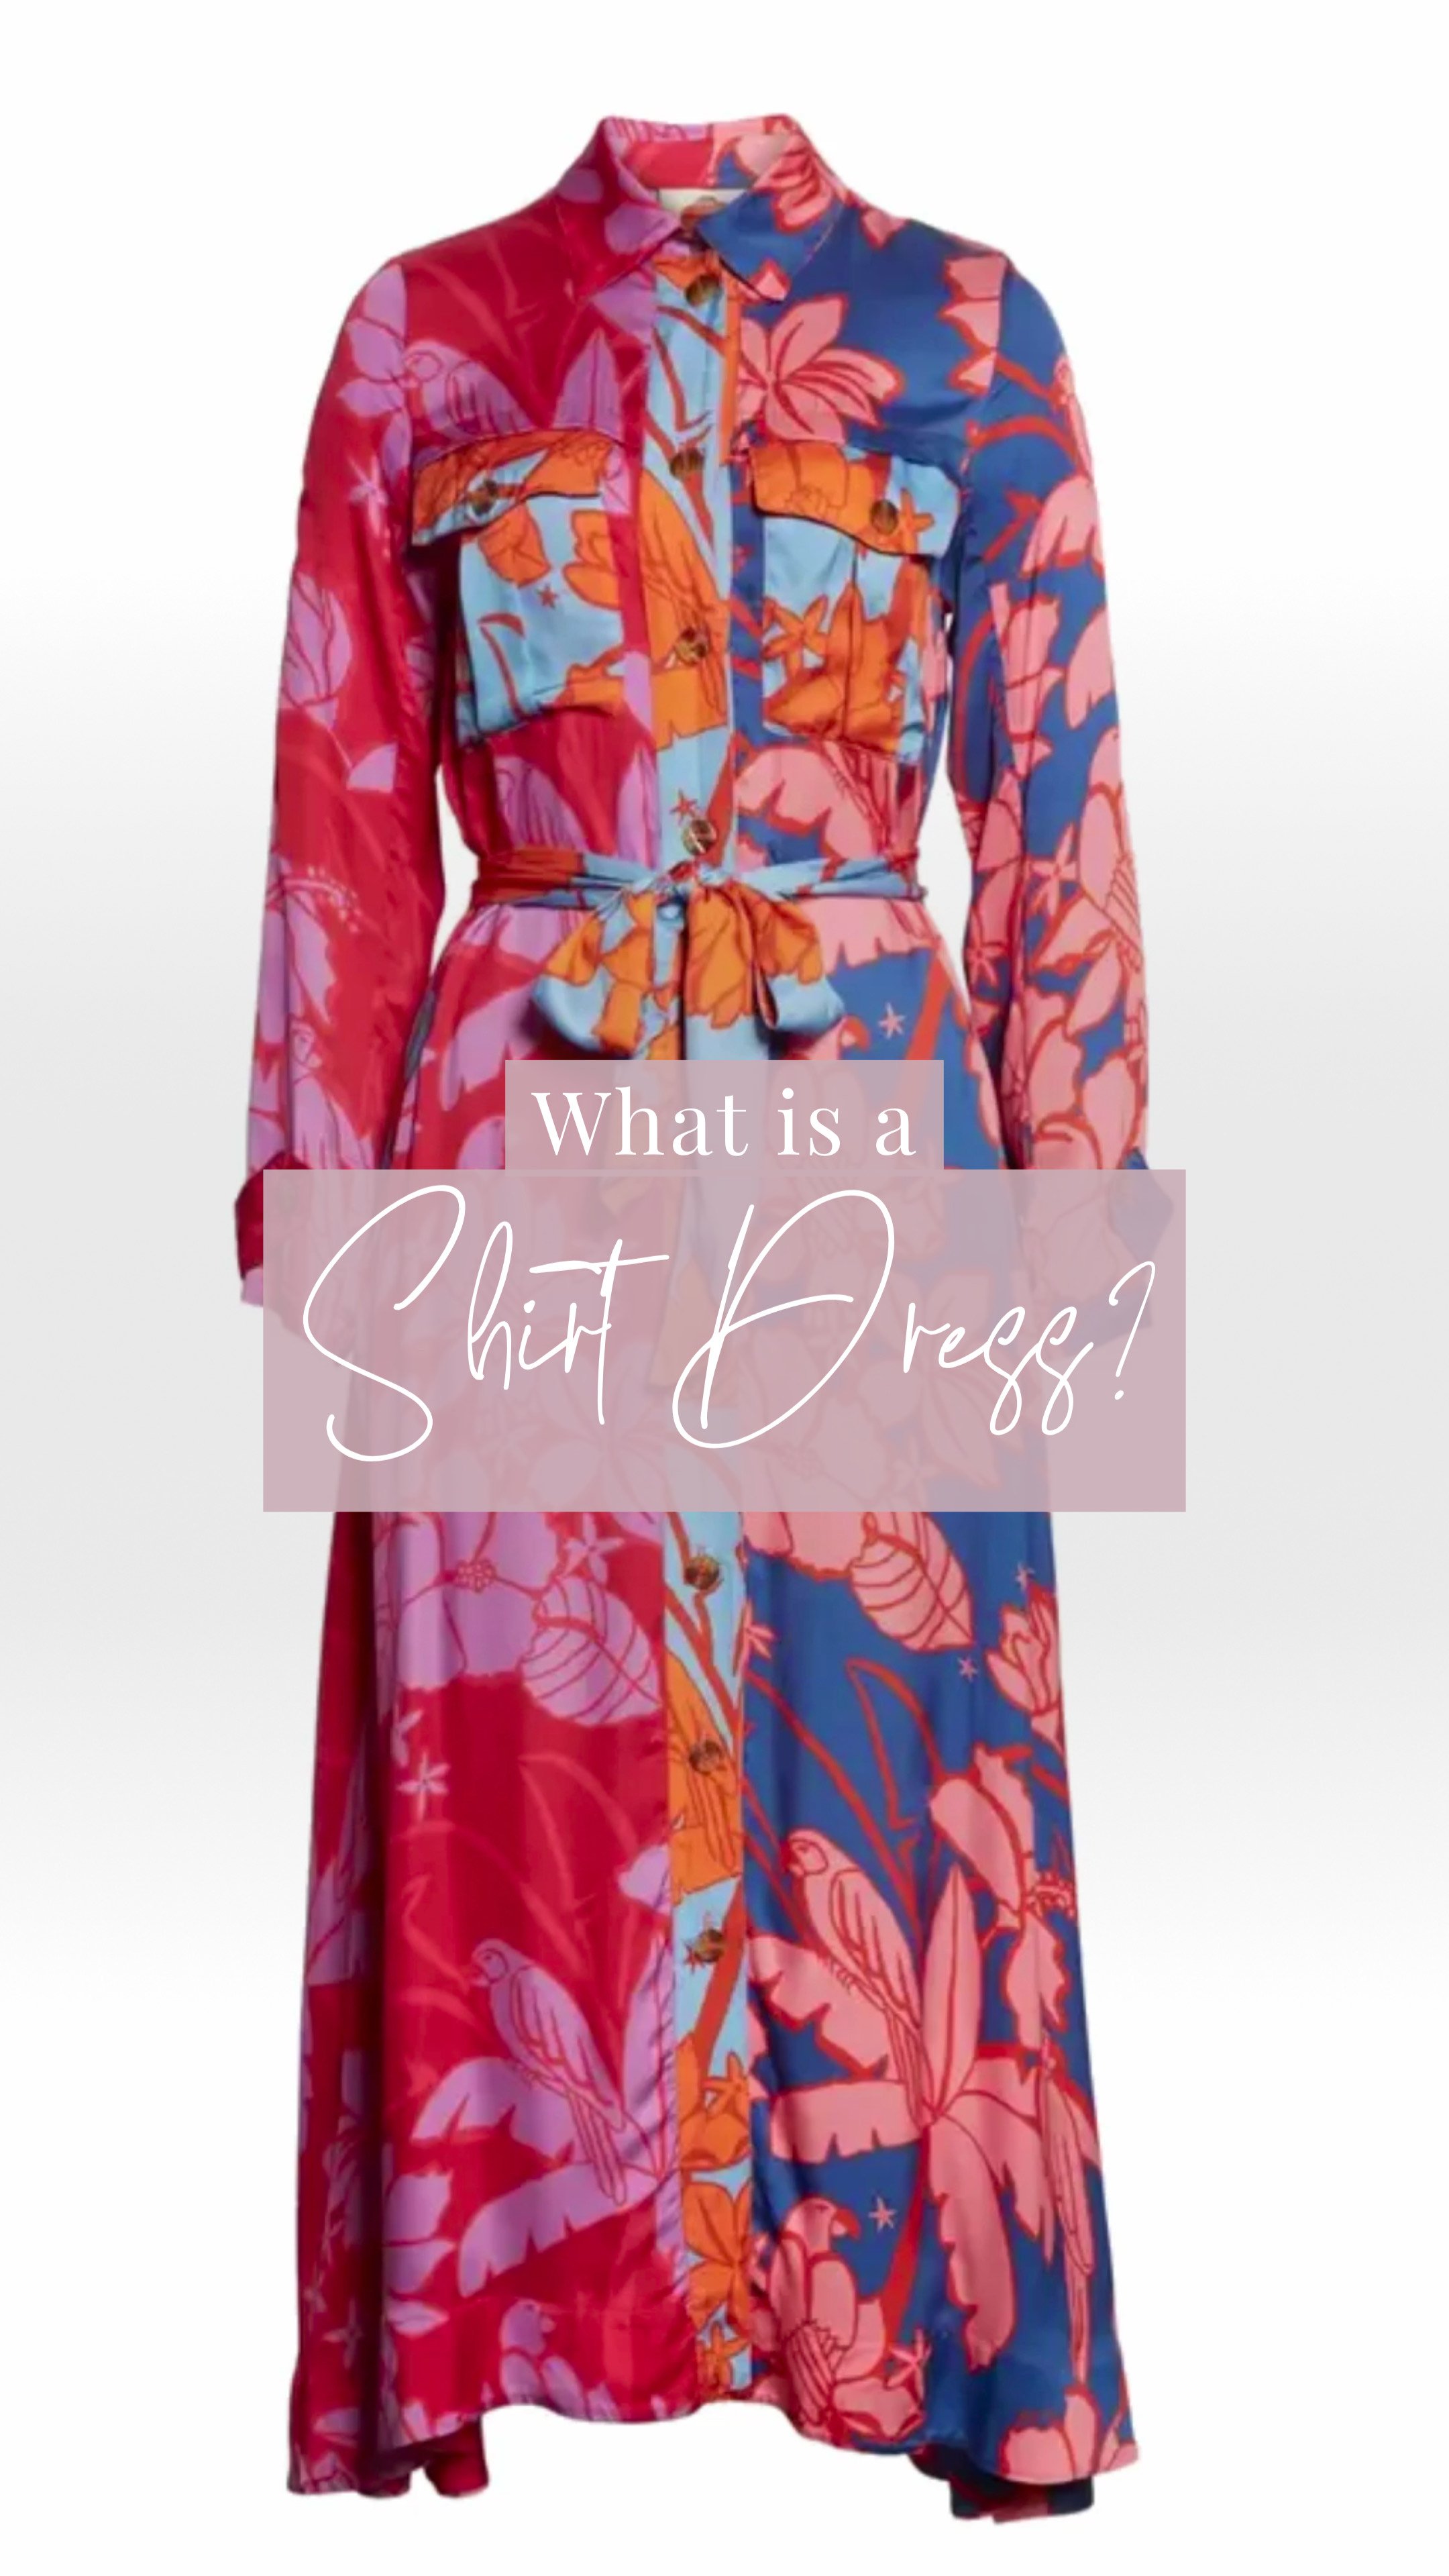 WHAT IS A SHIRT DRESS?